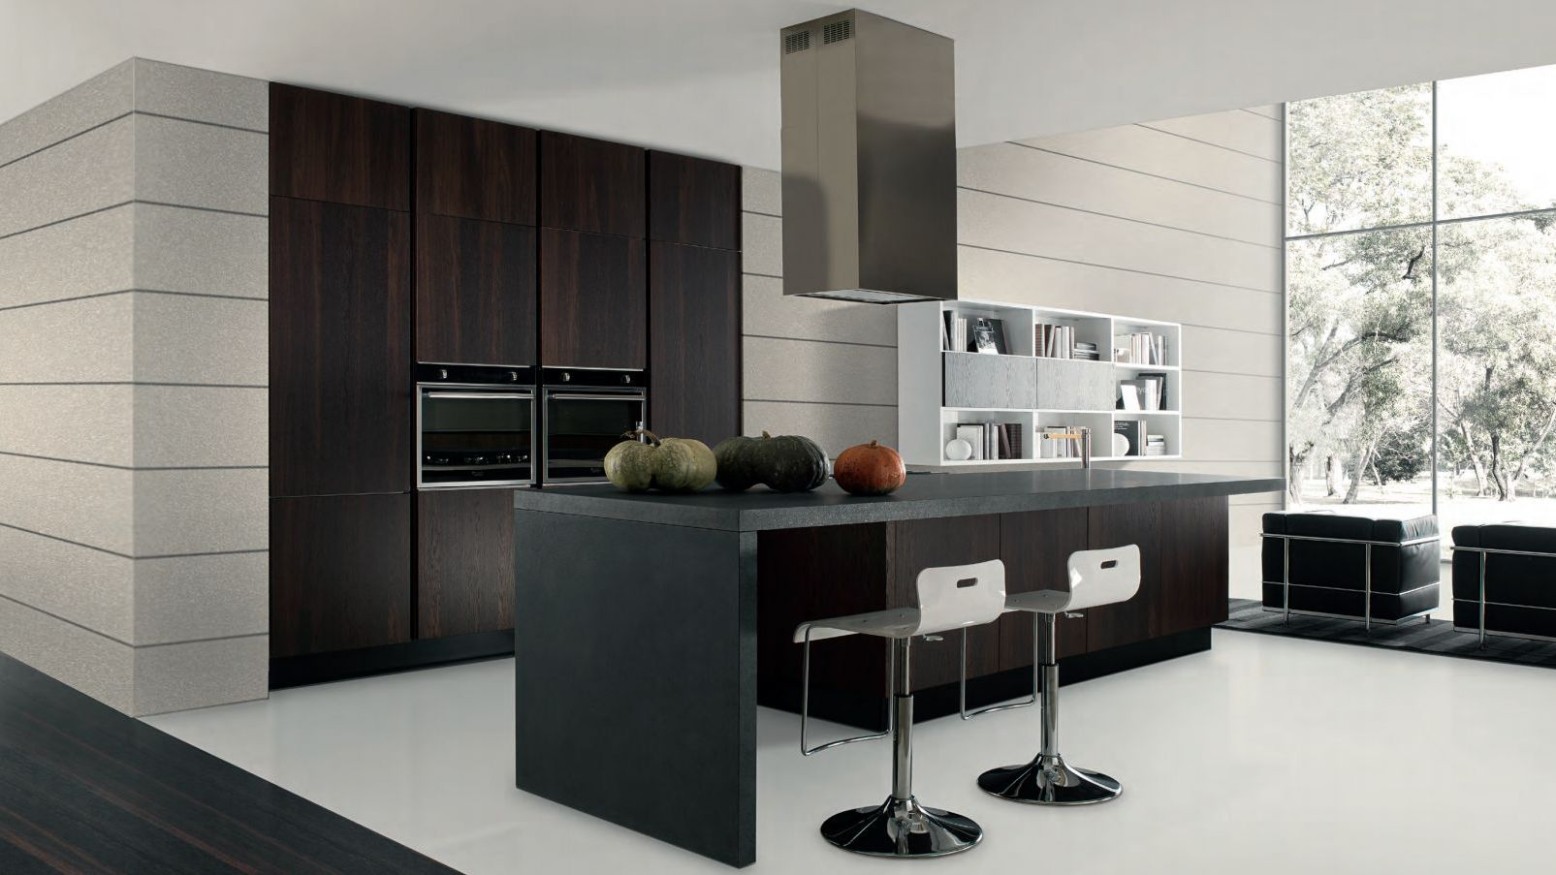 7 Original Modern Kitchens and Trends - latest kitchen images